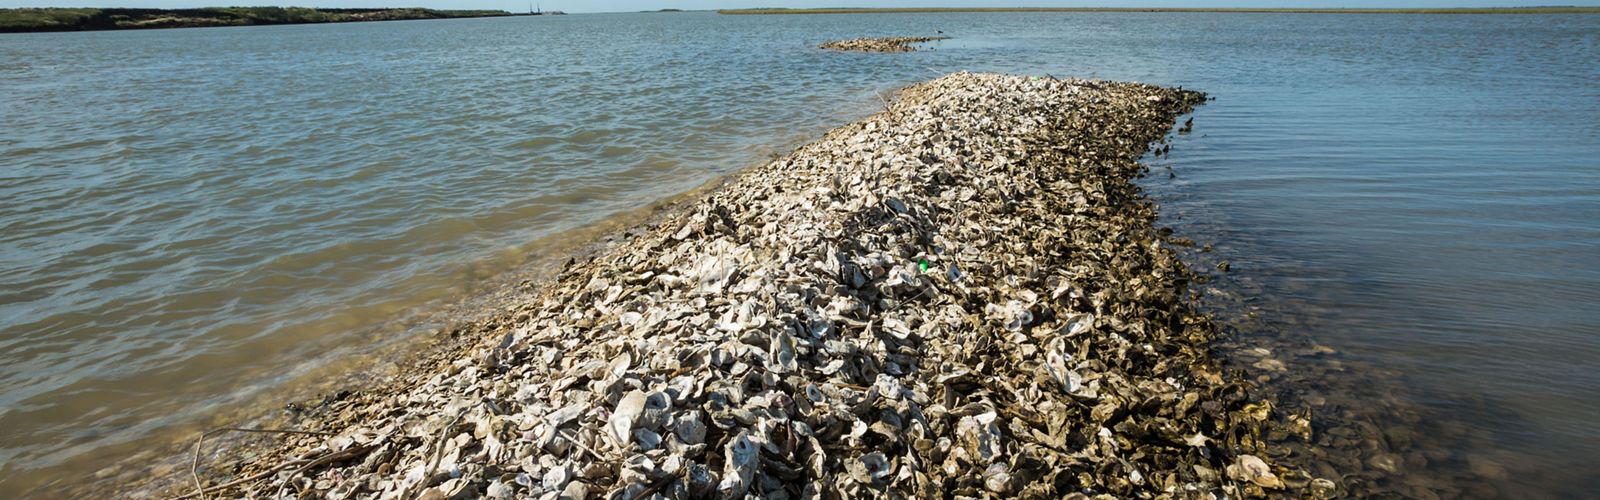 A mound of oyster shells stretches out across shallow ocean waters. 